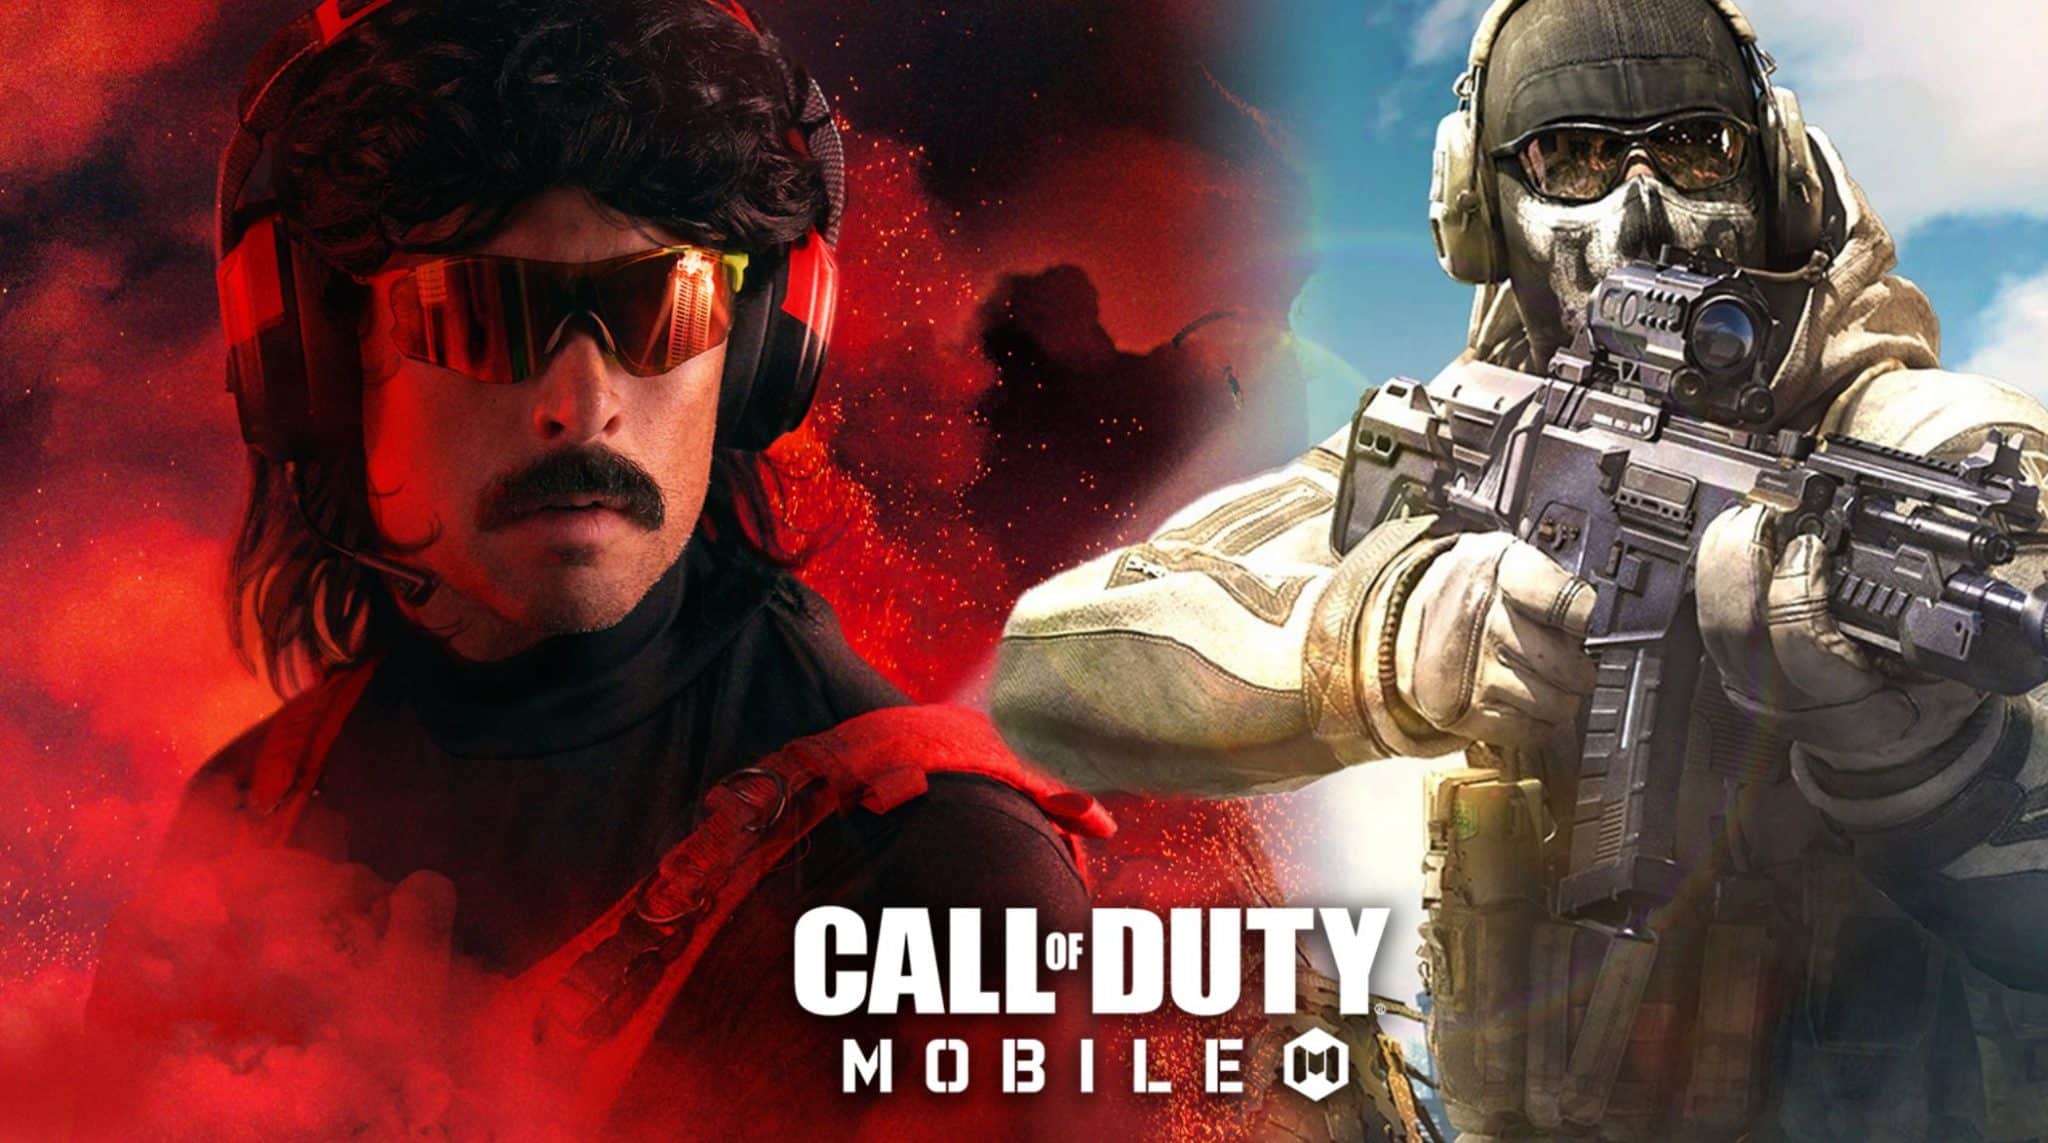 Call of Duty: Mobile World Championship to feature huge $2 million